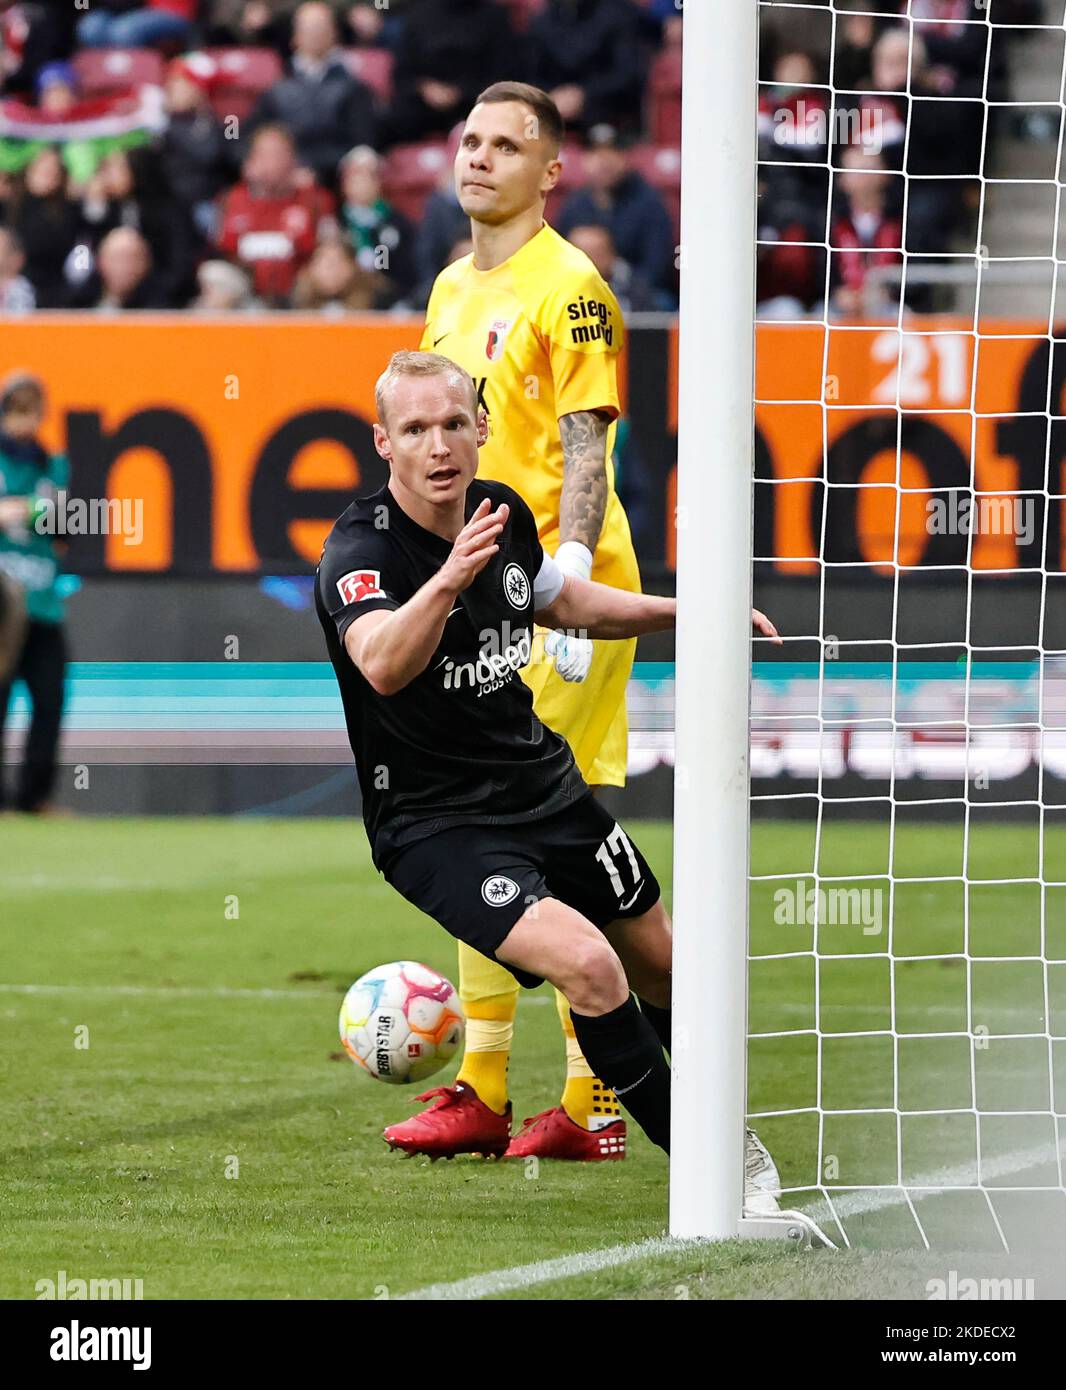 Augsburg, Germany. 5th Nov, 2022. Sebastian Rode (front) of Frankfurt reacts after scoring during the German first division Bundesliga football match between FC Augsburg and Eintracht Frankfurt in Augsburg, Germany, Nov. 5, 2022. Credit: Philippe Ruiz/Xinhua/Alamy Live News Stock Photo